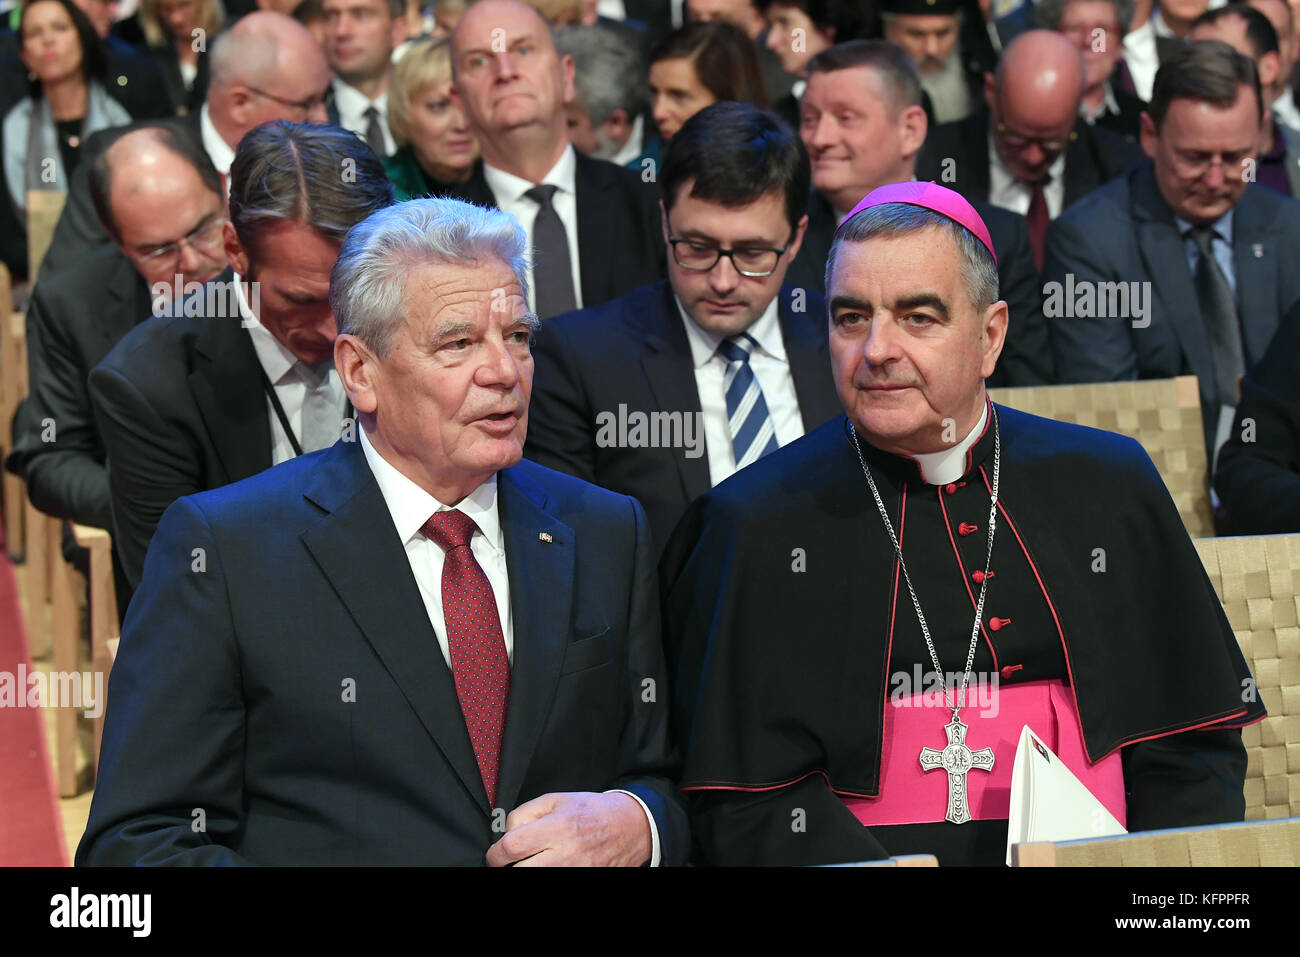 Wittenberg, Germany. 31st Oct, 2017. Former German president Joachim Gauck (L) and Nikola Eterovic, titular archbishop of the Roman Catholic Church and diplomat of the Holy See, at an event to mark the 500th anniversary of the beginning of the Reformation, at the Stadthaus in Wittenberg, Germany, 31 October 2017. Martin Luther is said to have posted his 95 theses on the door of the Schlosskirche in Wittenberg on 31 October 1517. Credit: Hendrik Schmidt/dpa-Zentralbild/dpa/Alamy Live News Stock Photo